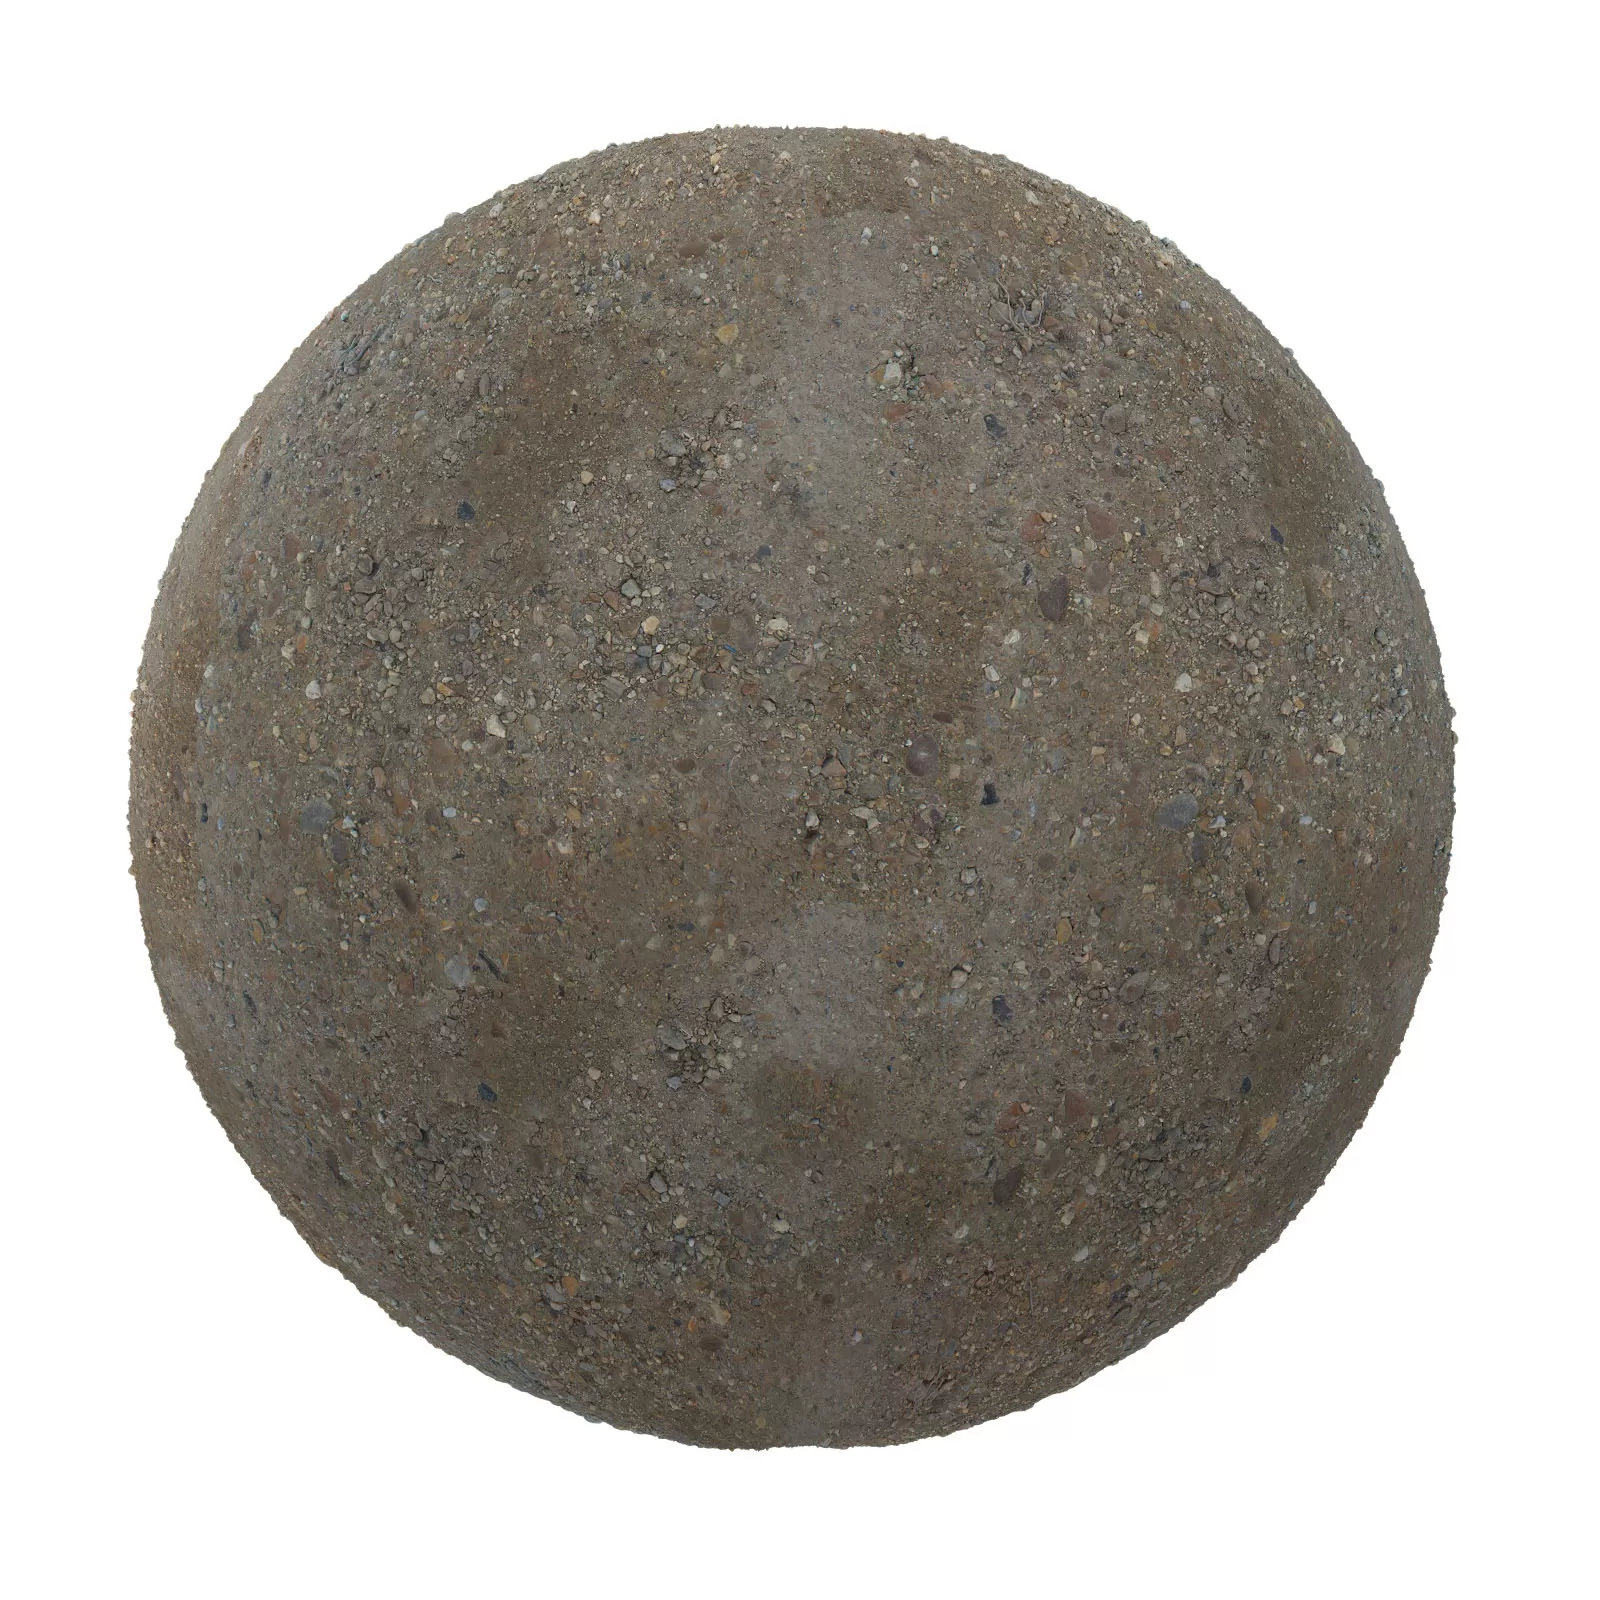 PBR CGAXIS TEXTURES – SOIL – Dirt With Stones 4